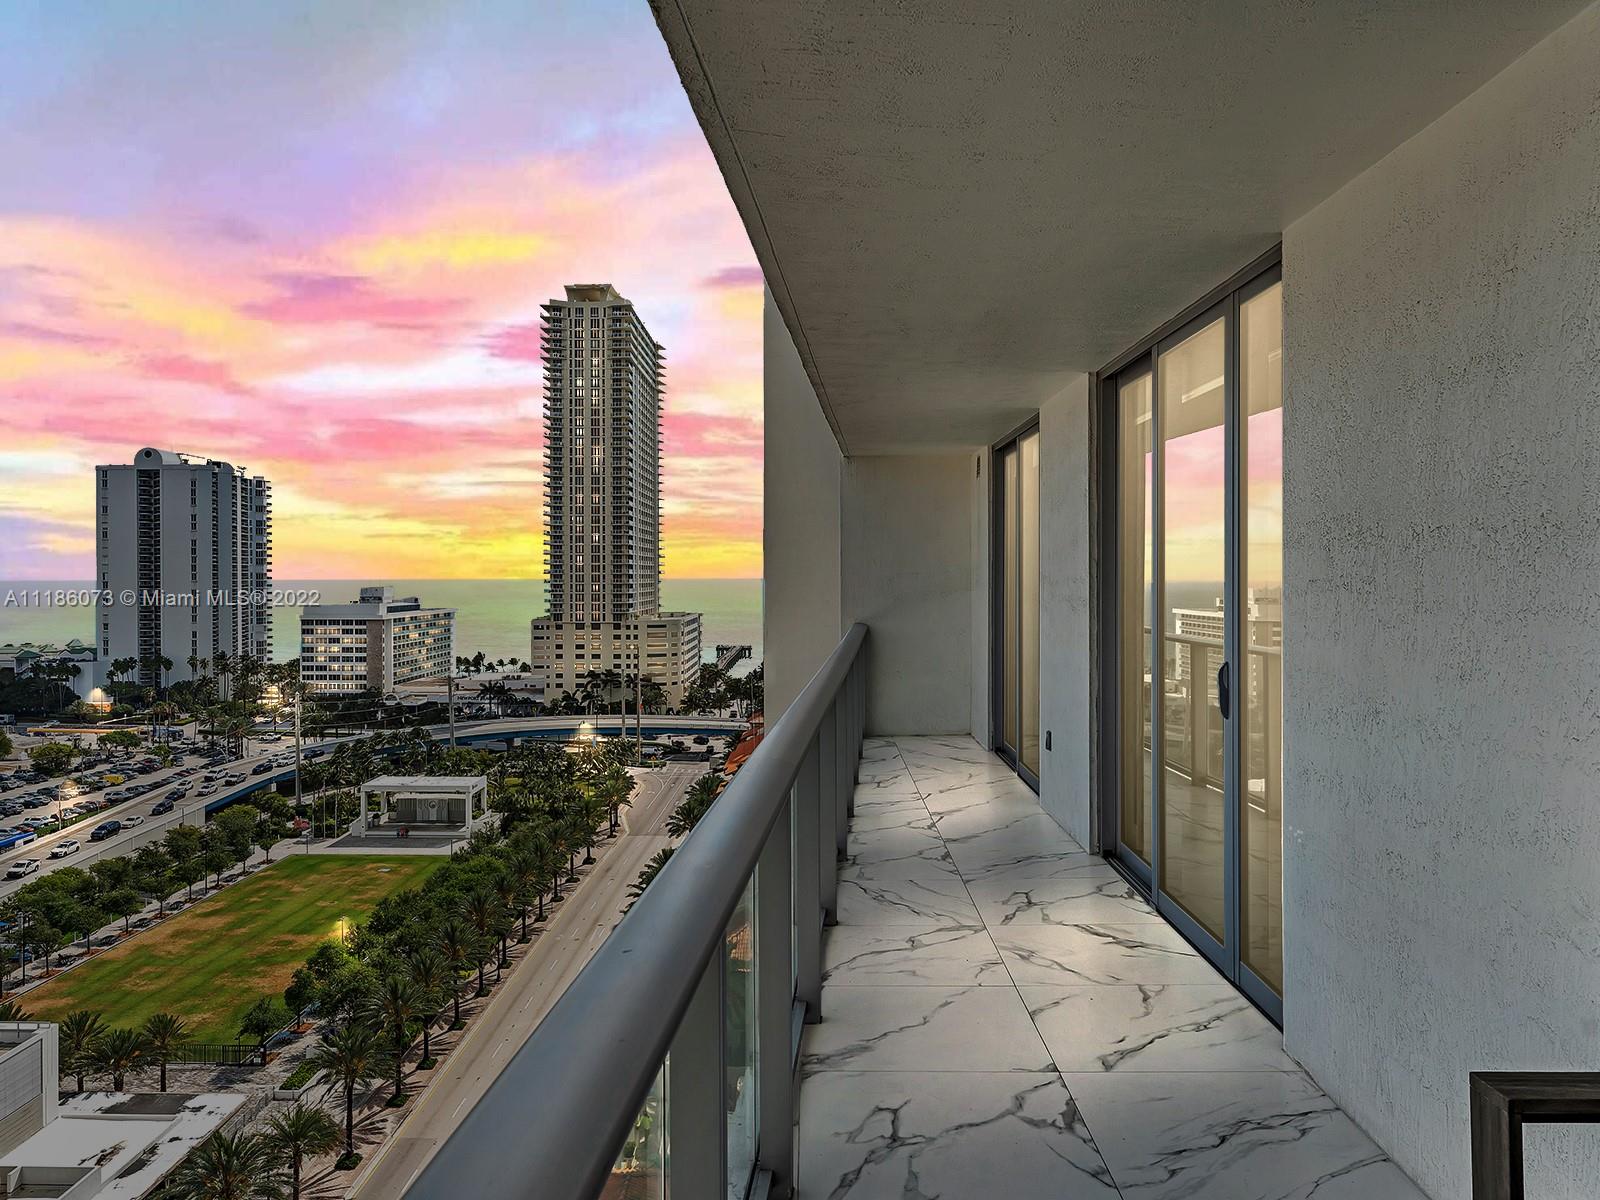 Spectacular 2 Bedrooms + enclosed Den (used as a 3rd bedroom) / 3 full bathrooms apartment in the luxury building Parque Towers in Sunny Isles. This beautiful unit features open kitchen, top of the line appliances, impact windows, walking closets, miami skyline, intracoastal and ocean views.The exclusive building offers 5 star resort style amenities including pools, kids pool, fitness center, sauna, beach club, movie theater, indoor children playroom, valet parking, business center, concierge services, 24 hours attended lobby and more. Amazing location, walking distance to the beach, restaurants and shopping centers. 360 VIRTUAL TOUR AVAILABLE!!